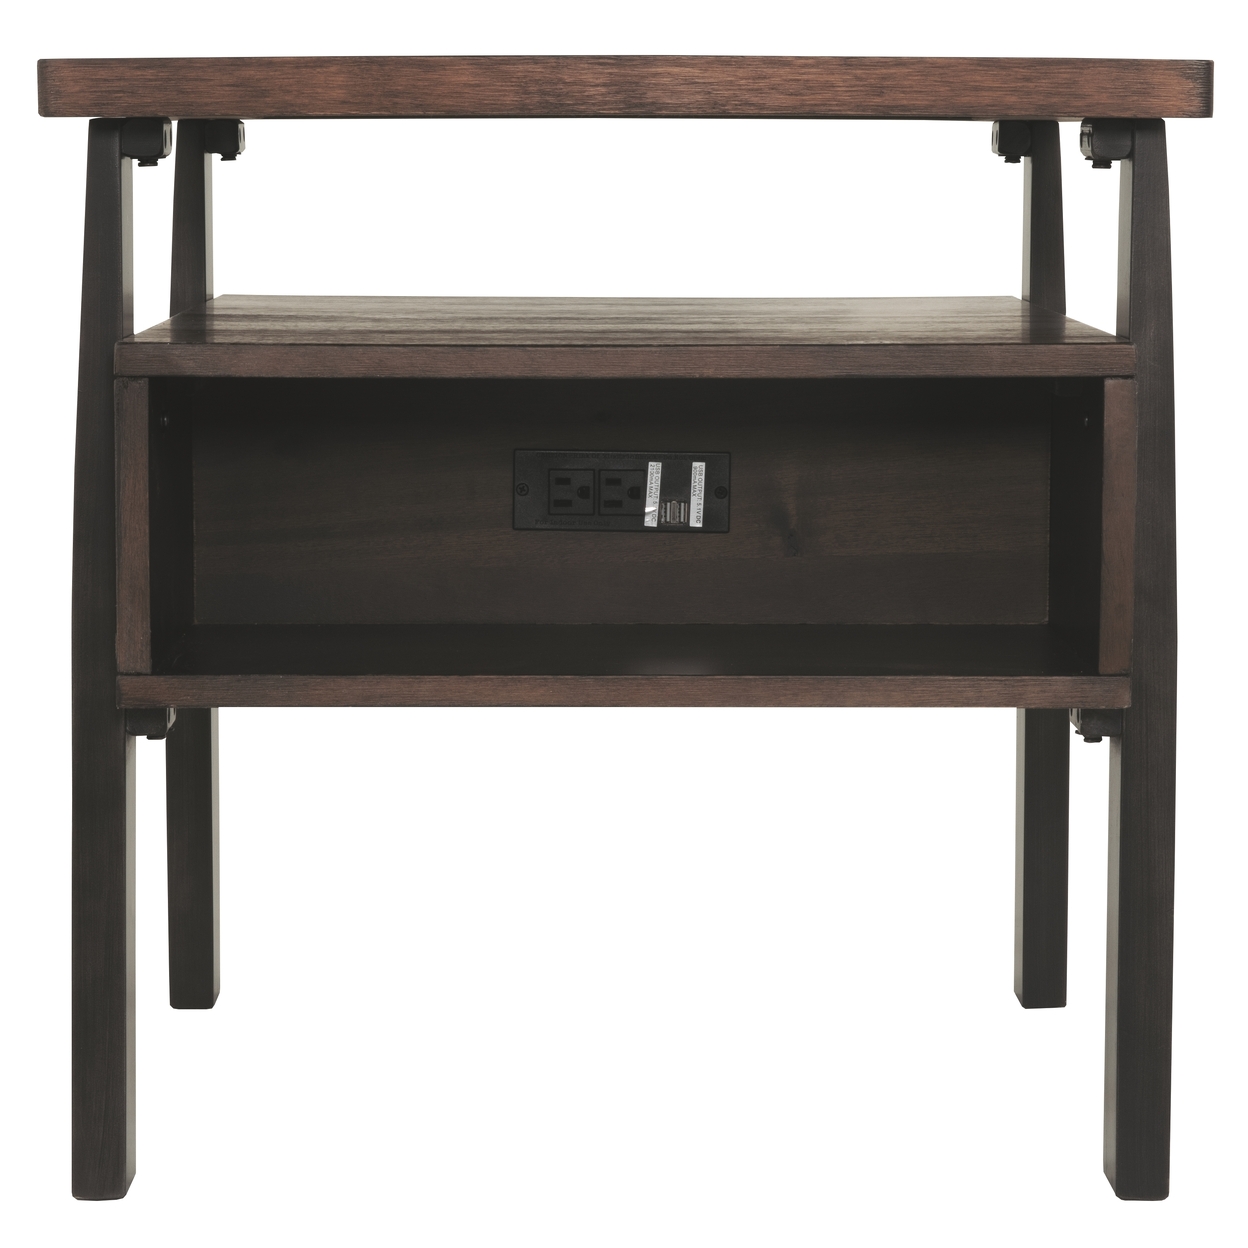 Wooden End Table With Power Outlets And USB Ports, Brown- Saltoro Sherpi